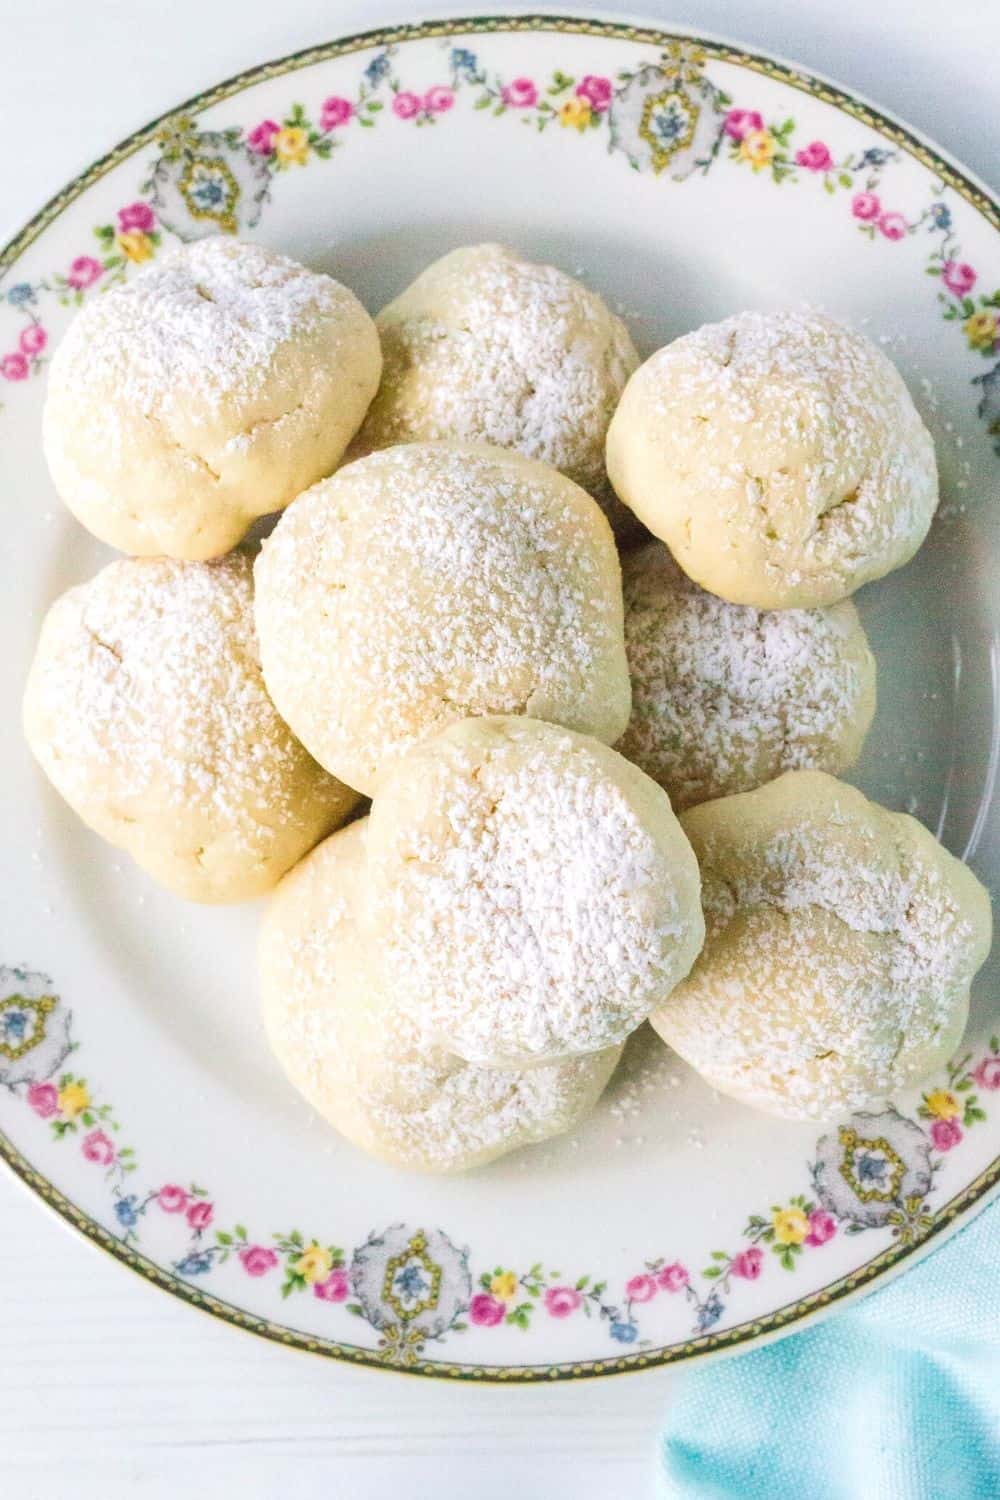 cream cheese cookies dusted with powdered sugar and served on a china plate